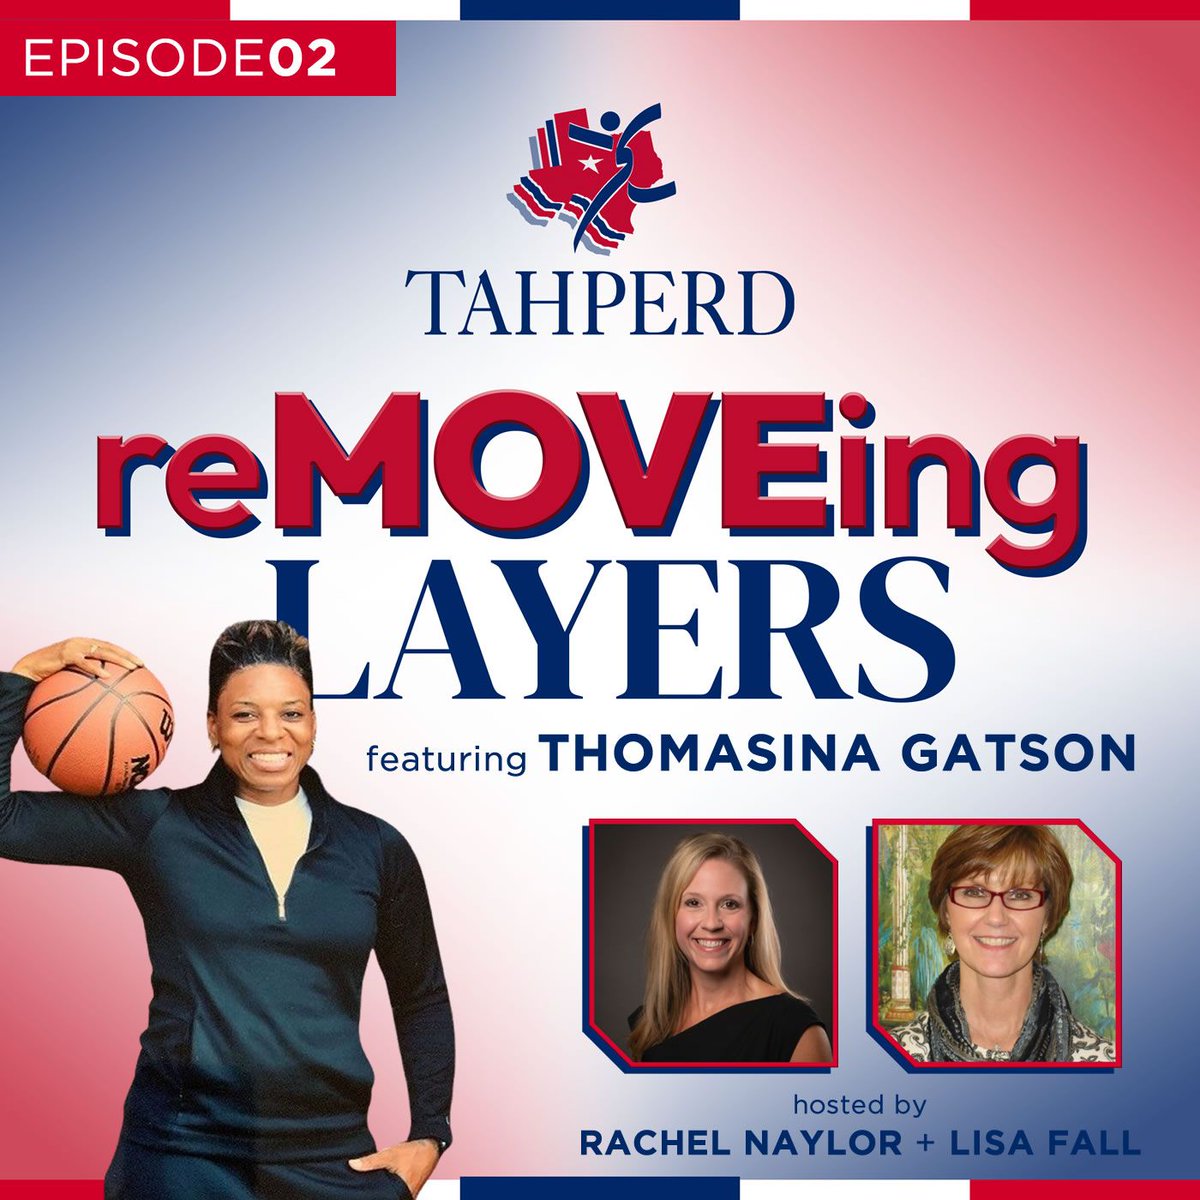 President-elect Thomasina Gatson will be on TAHPERD's 2nd episode, Season 1 at 9 AM CST. Tune in to hear her enthusiasm for TAHPERD and more! #TAHPERD #Season2